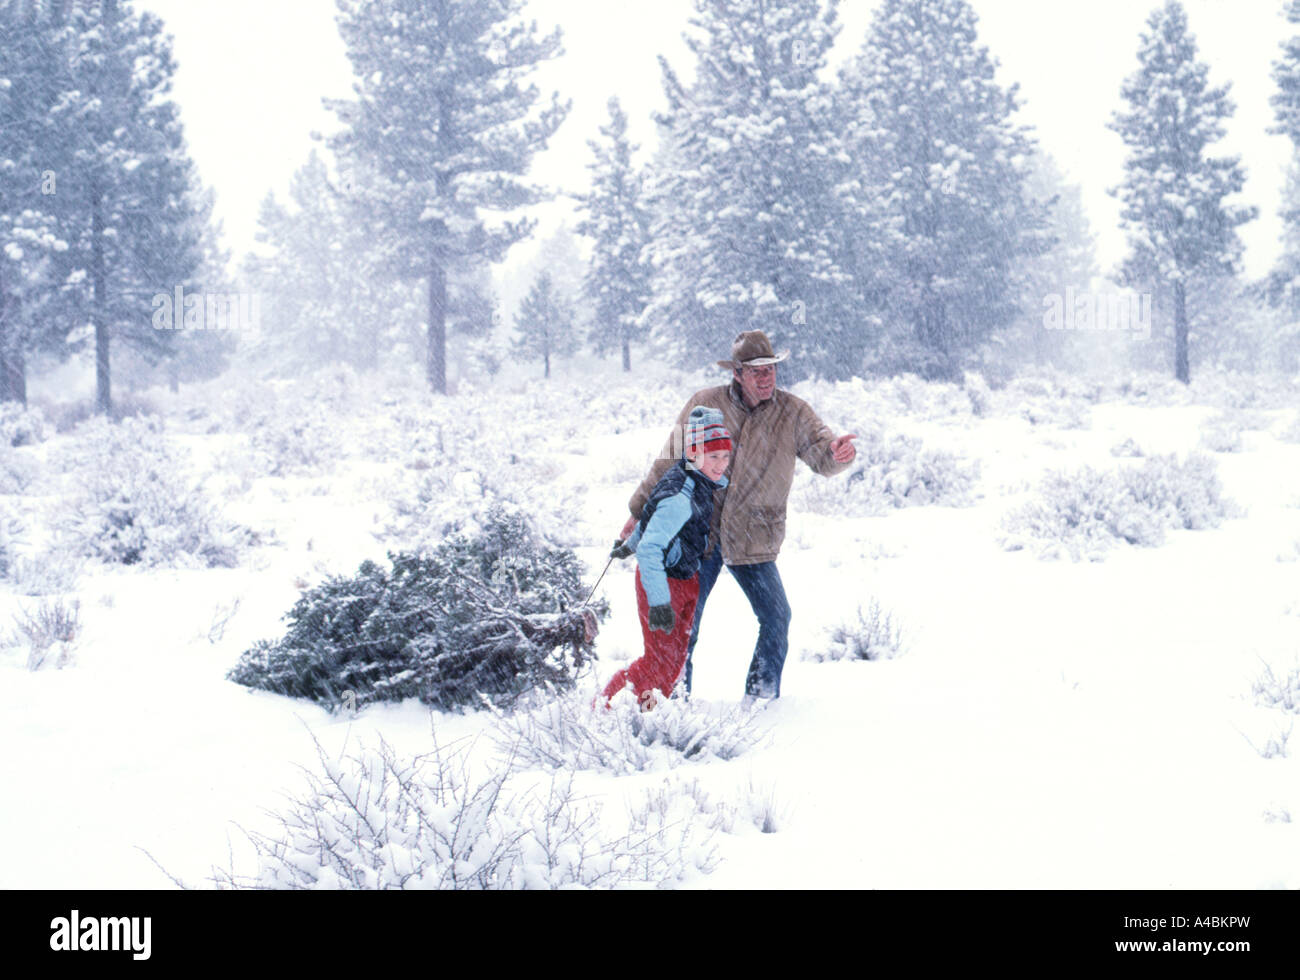 30,651.14100 Father & Son gathering a Christmas tree in the middle of a snowfall snowstorm, as a blanket of snow covers the ground and trees Stock Photo